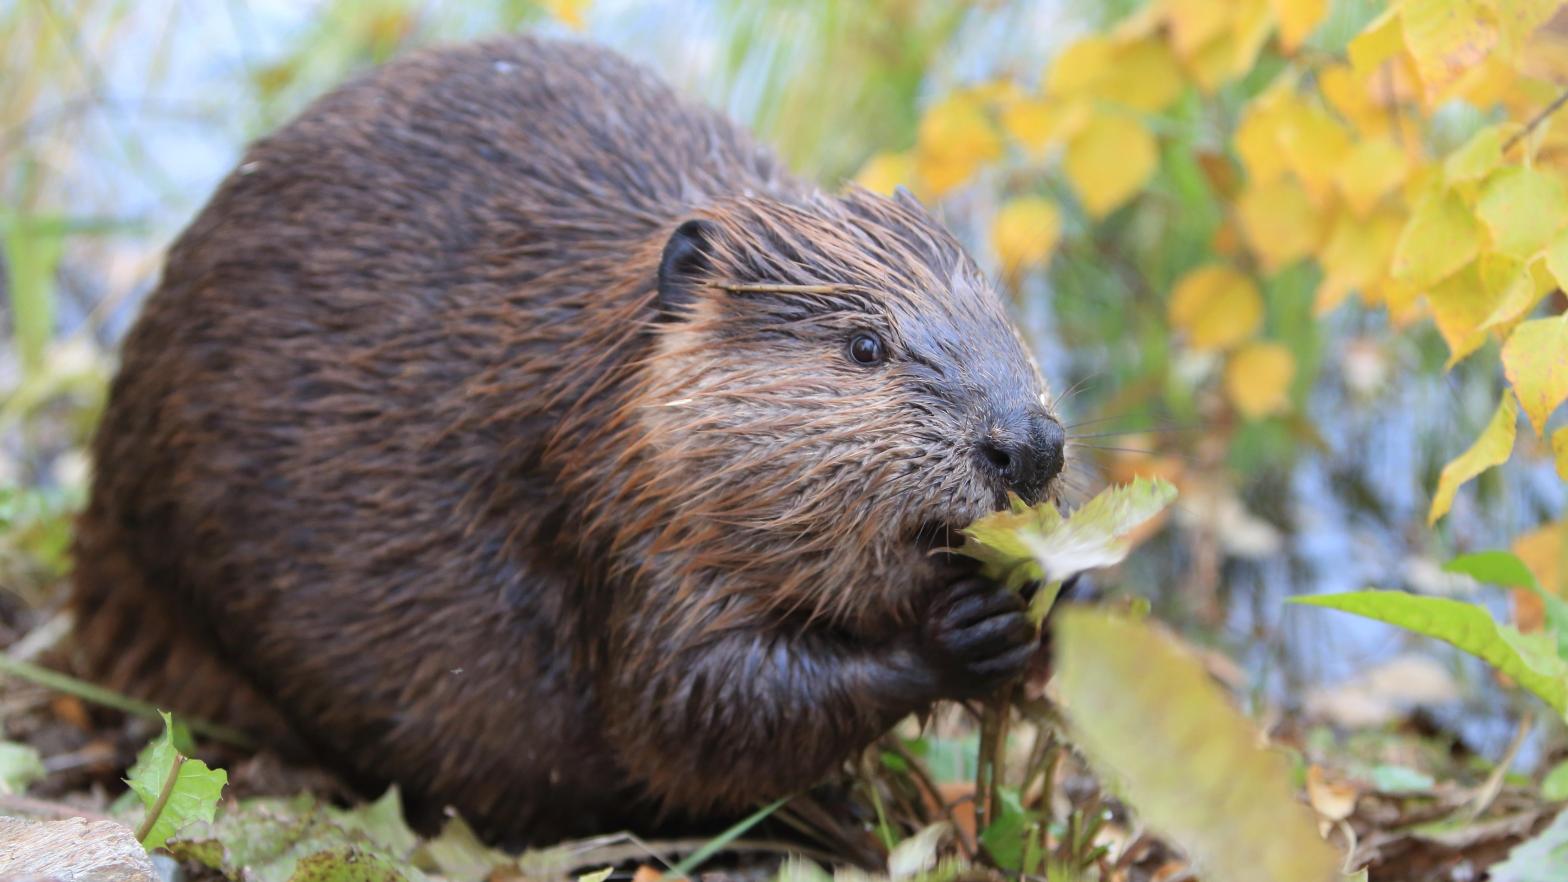 The North American beaver (Castor canadensis) is one of the many, many mammals included in the Zoonomia project. (Image: Frank Fichtmueller, Shutterstock)